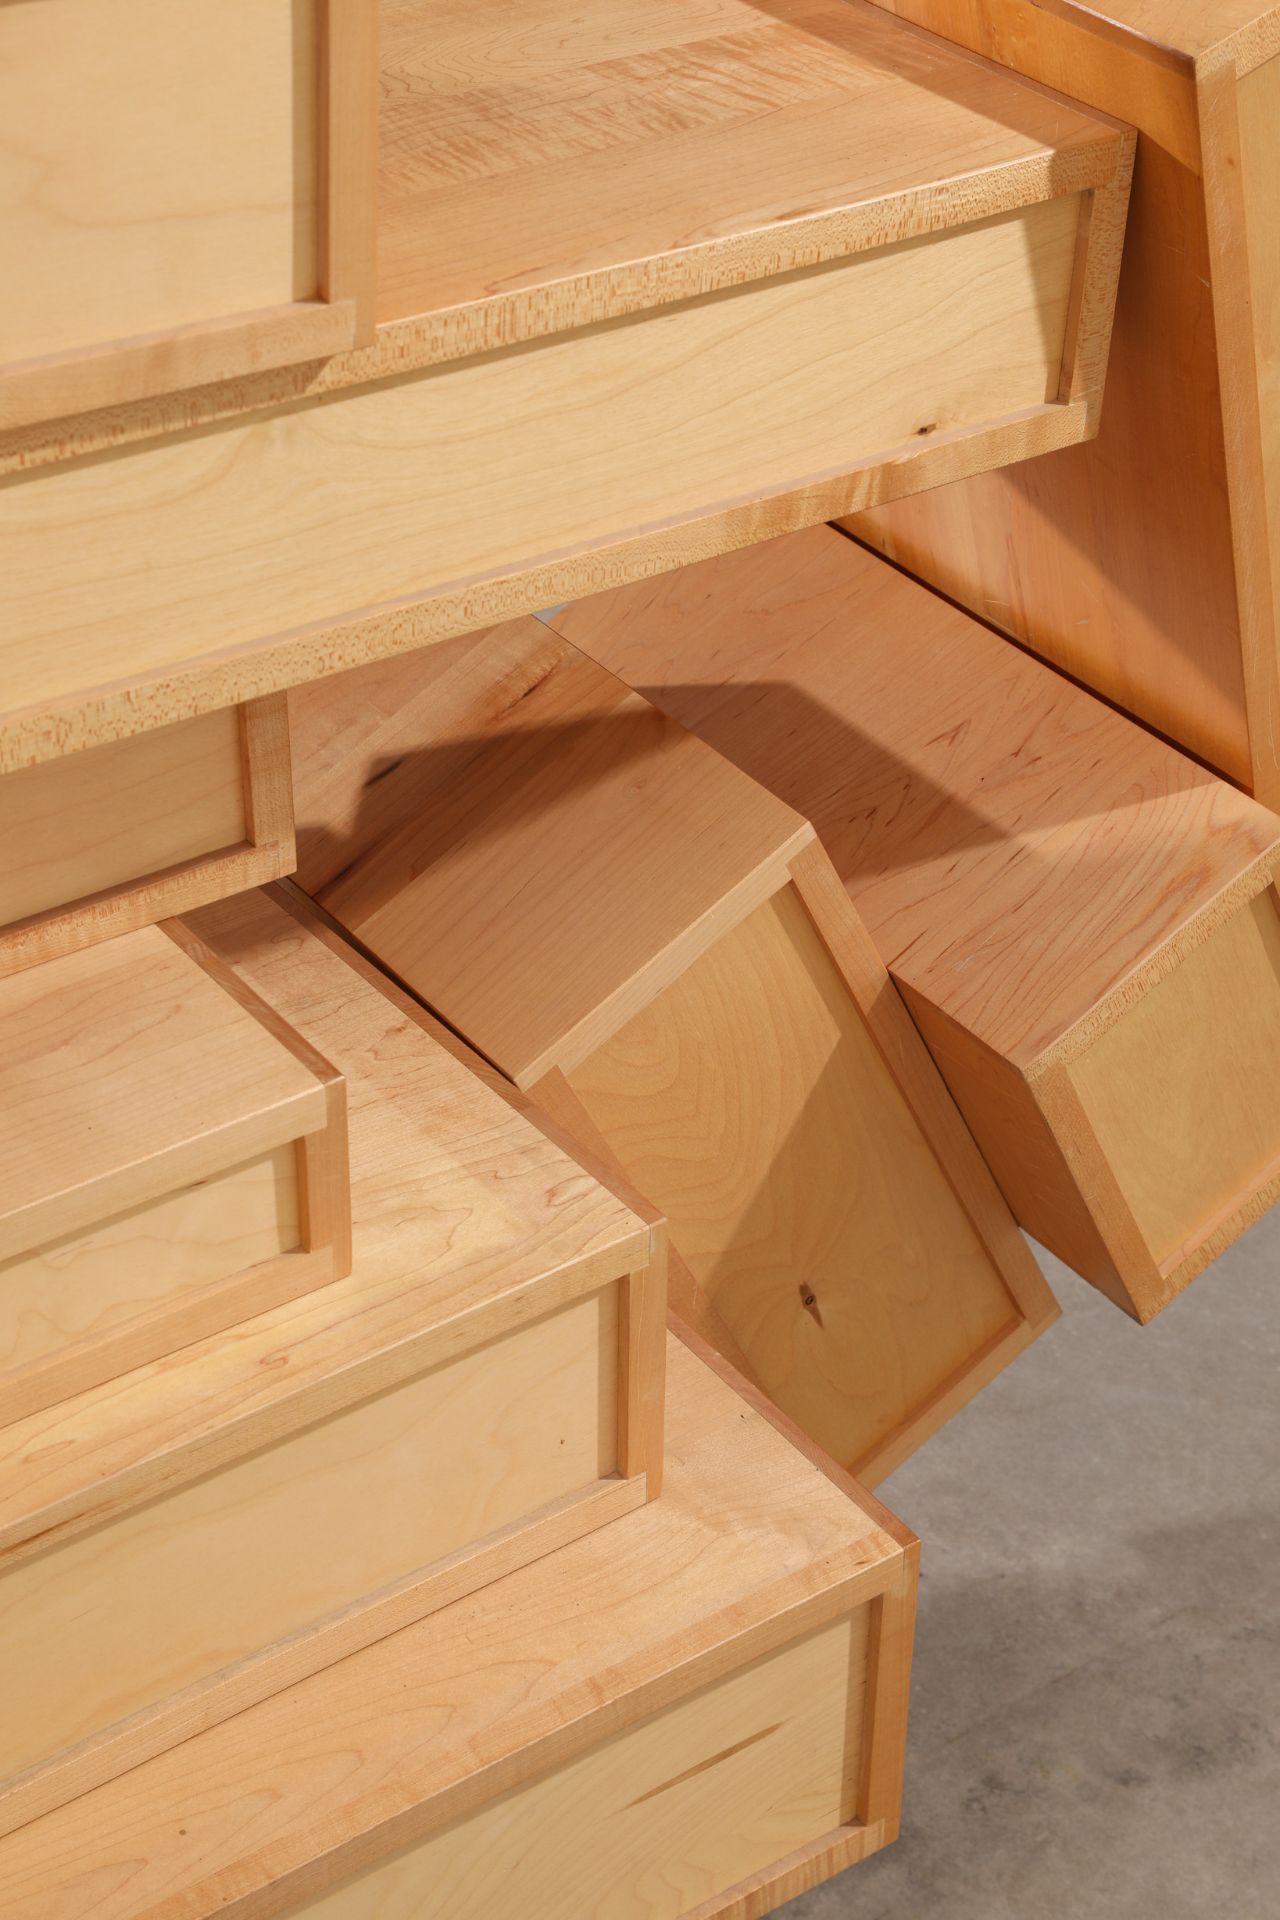 Tejo Rémy, droog design, Drawer object, model You can't lay down your memories - Image 6 of 9